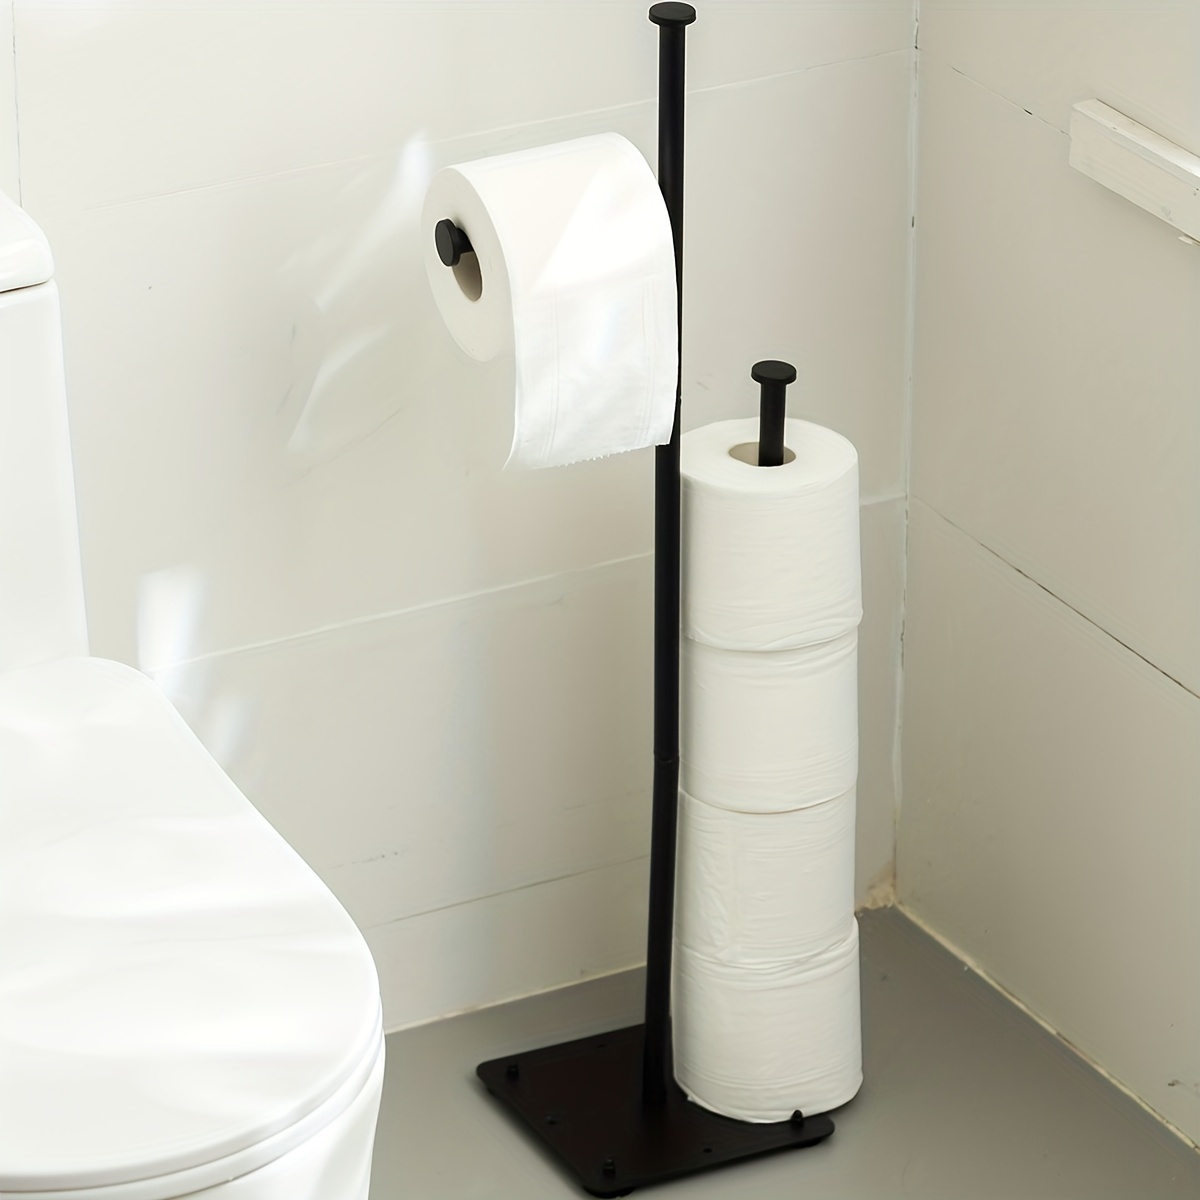 Toilet Paper Holder Stand, Storage Cabinet Beside Toilet for Small Space  Bathroom with Toilet Roll Holder, White by AOJEZOR